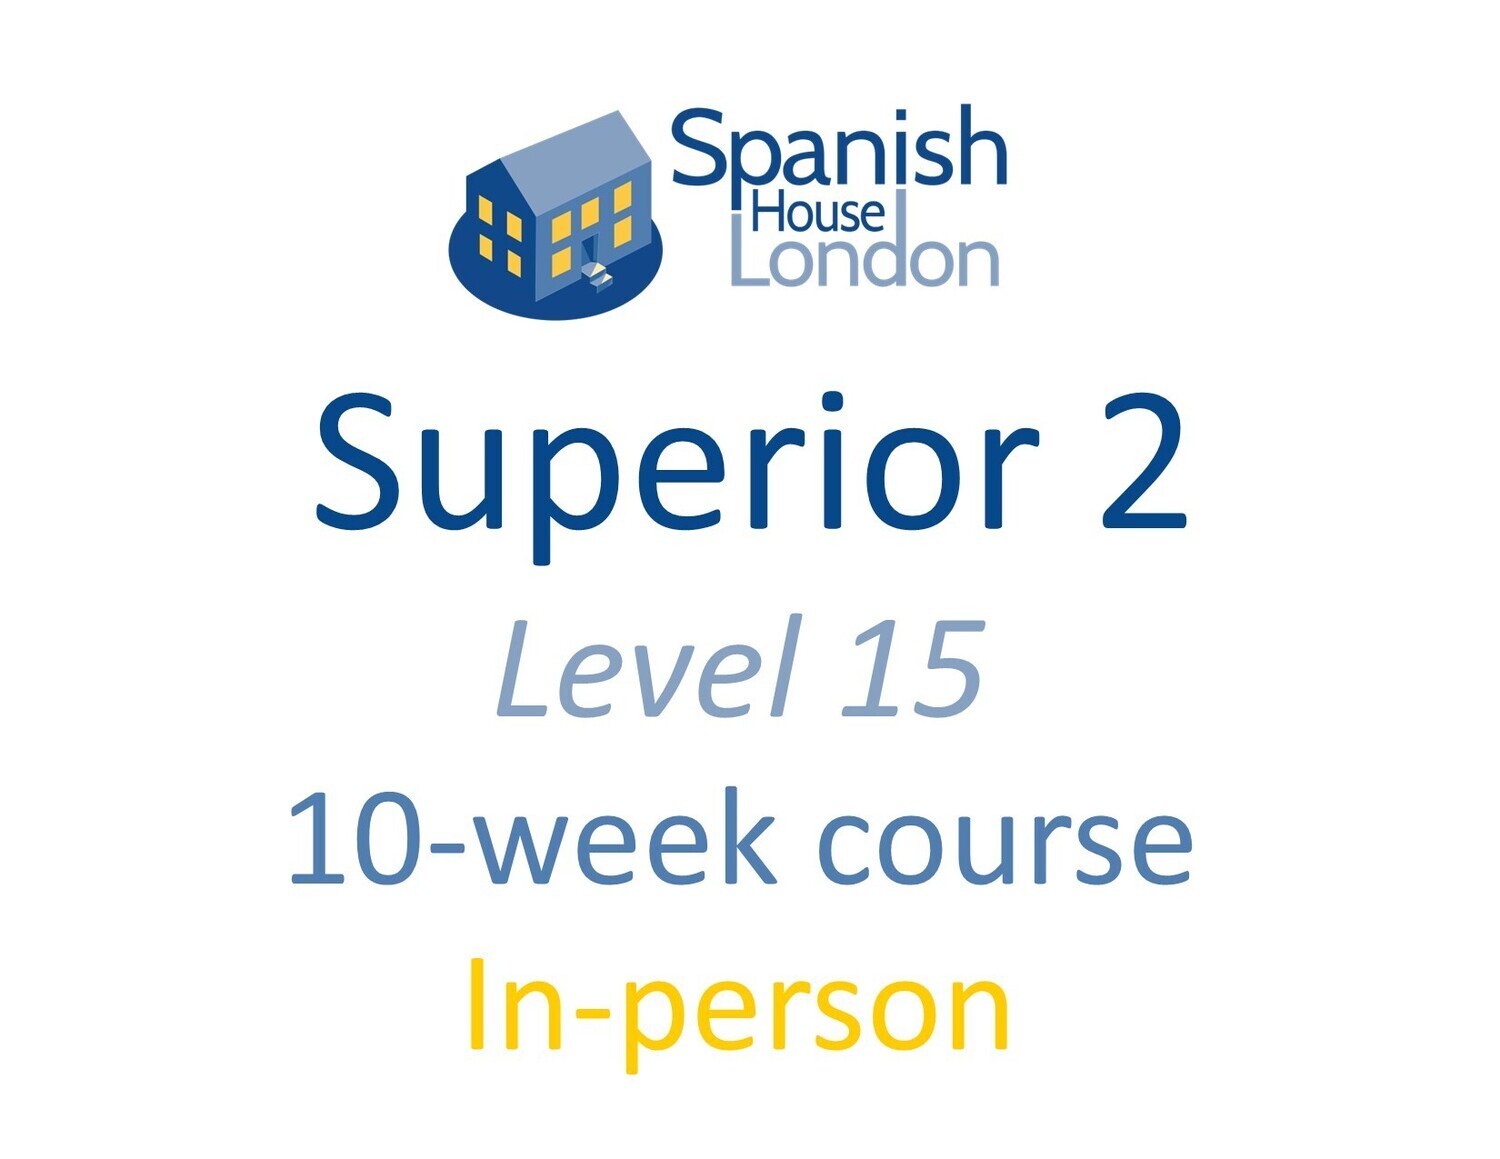 Superior 2 Course starting on 23rd November at 7.30pm in Clapham North